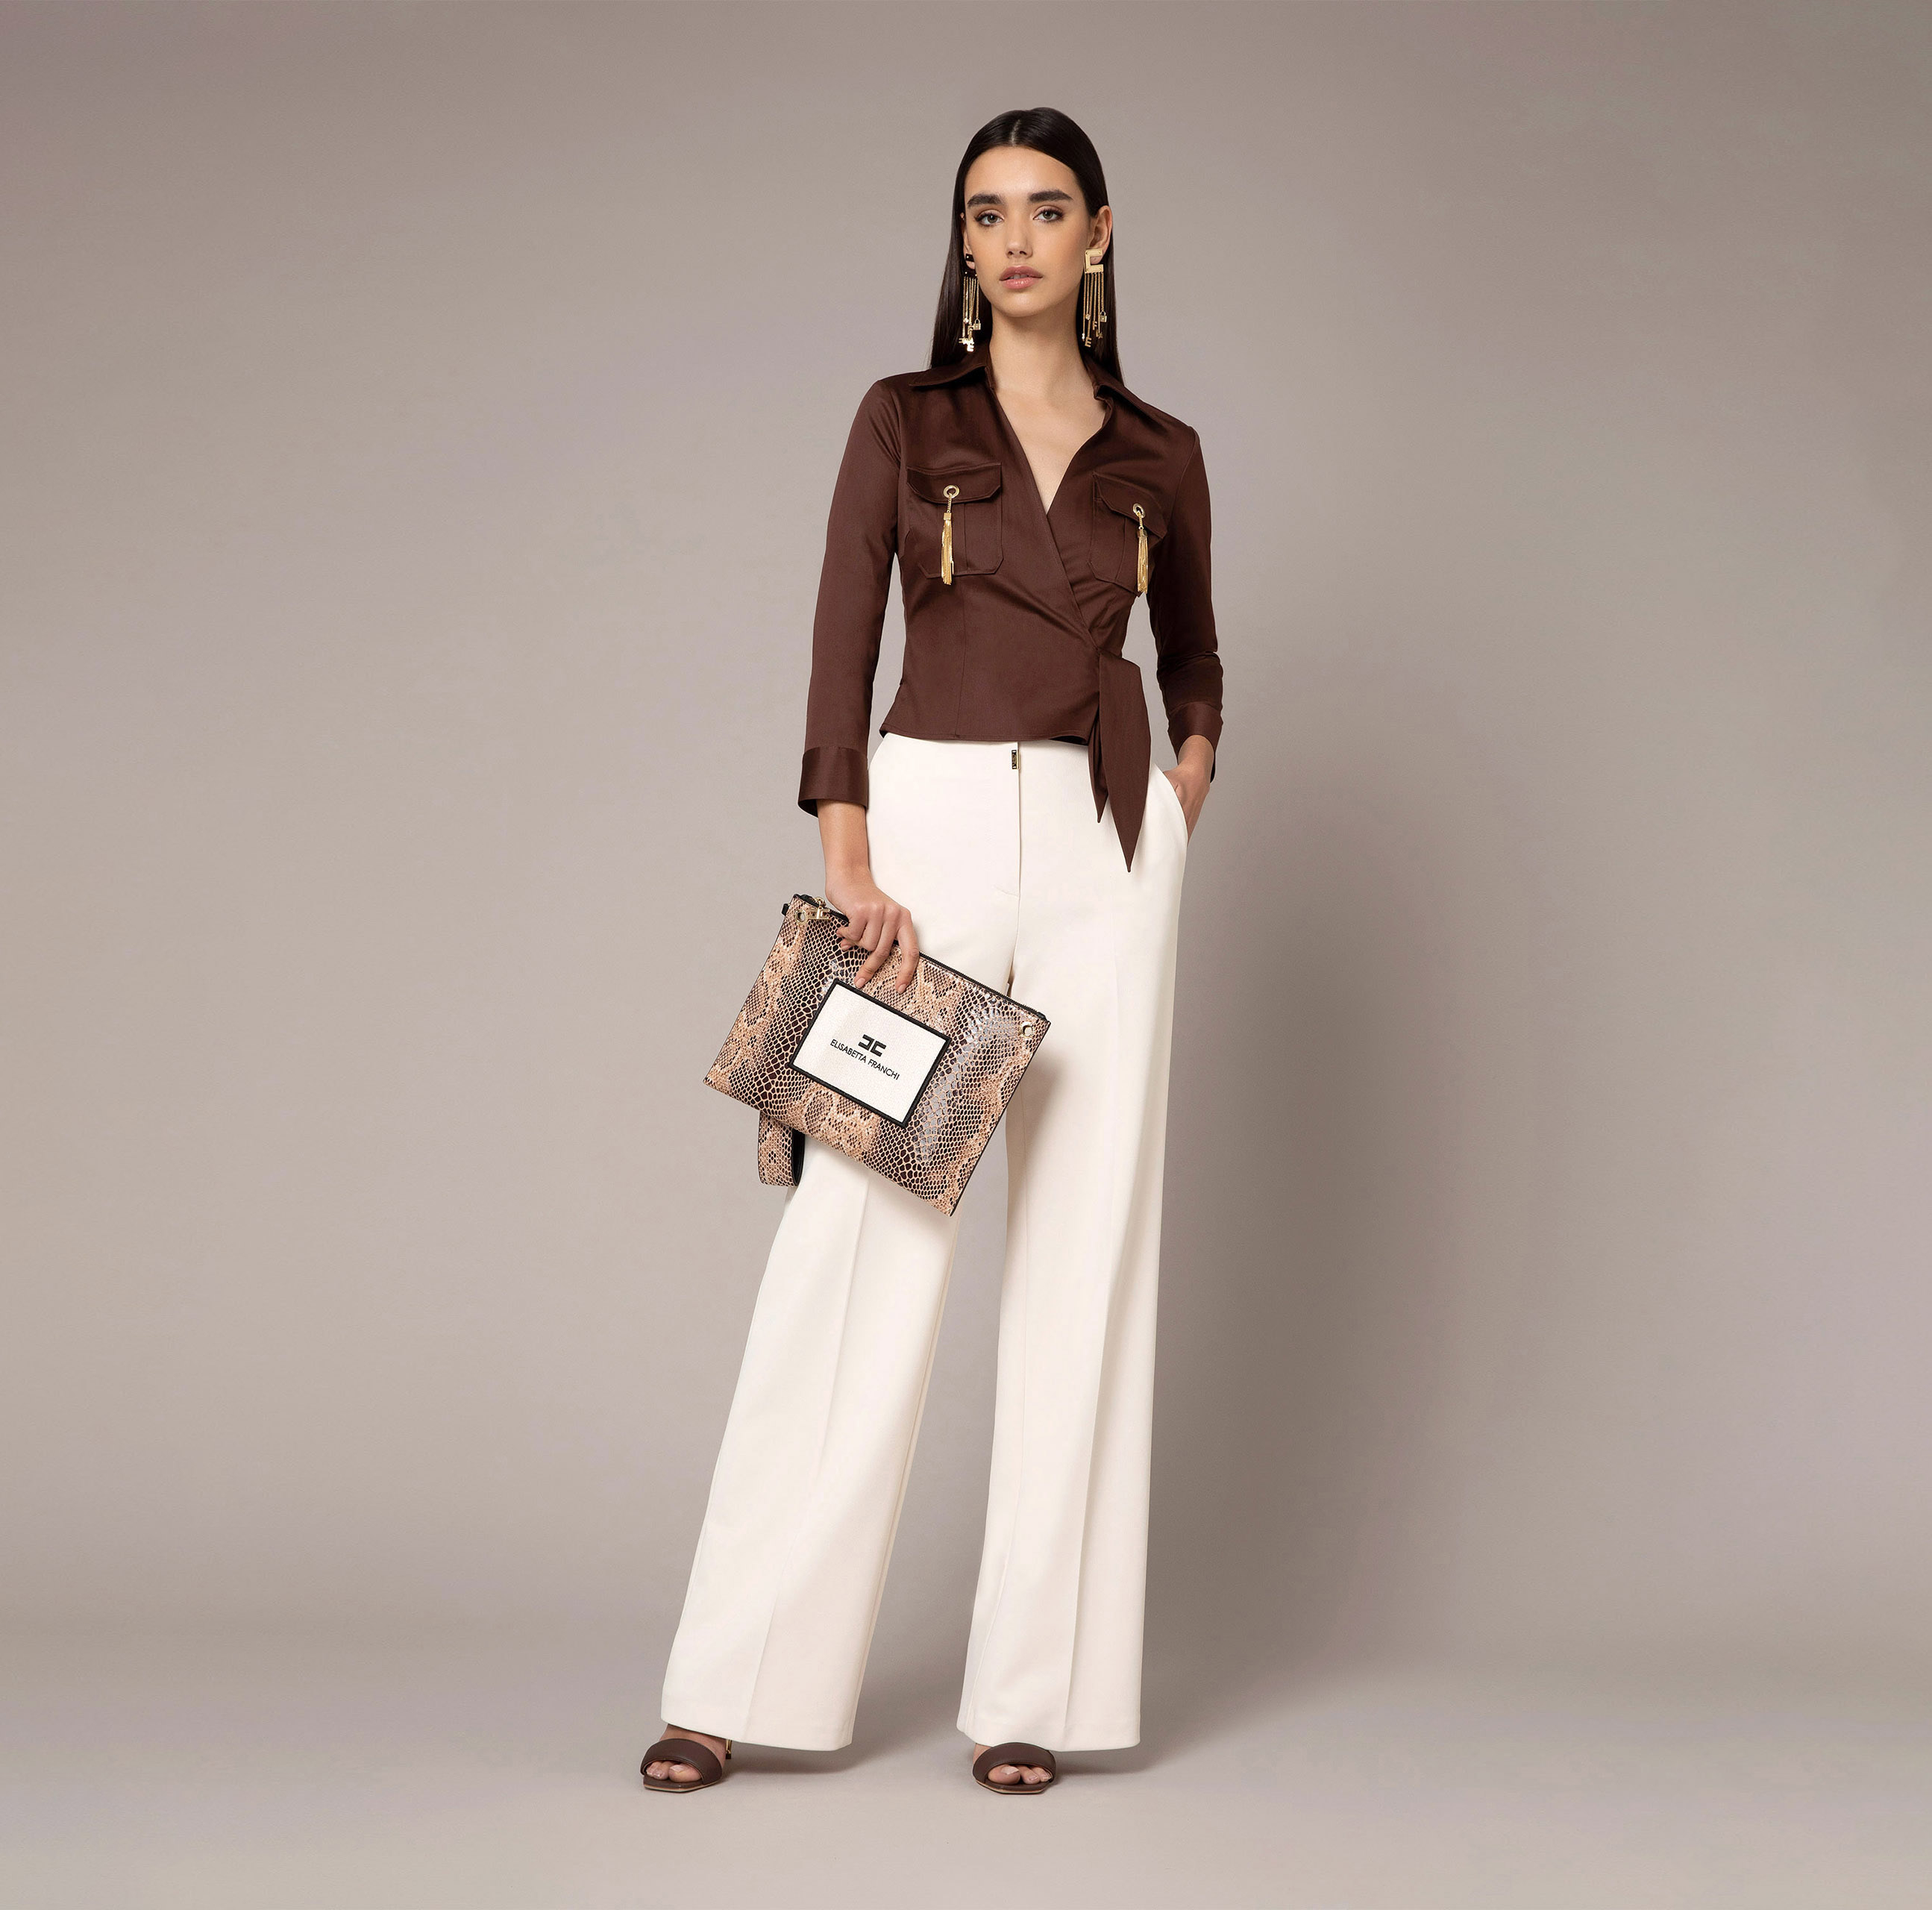 Crossover shirt with pockets and tassels - Elisabetta Franchi